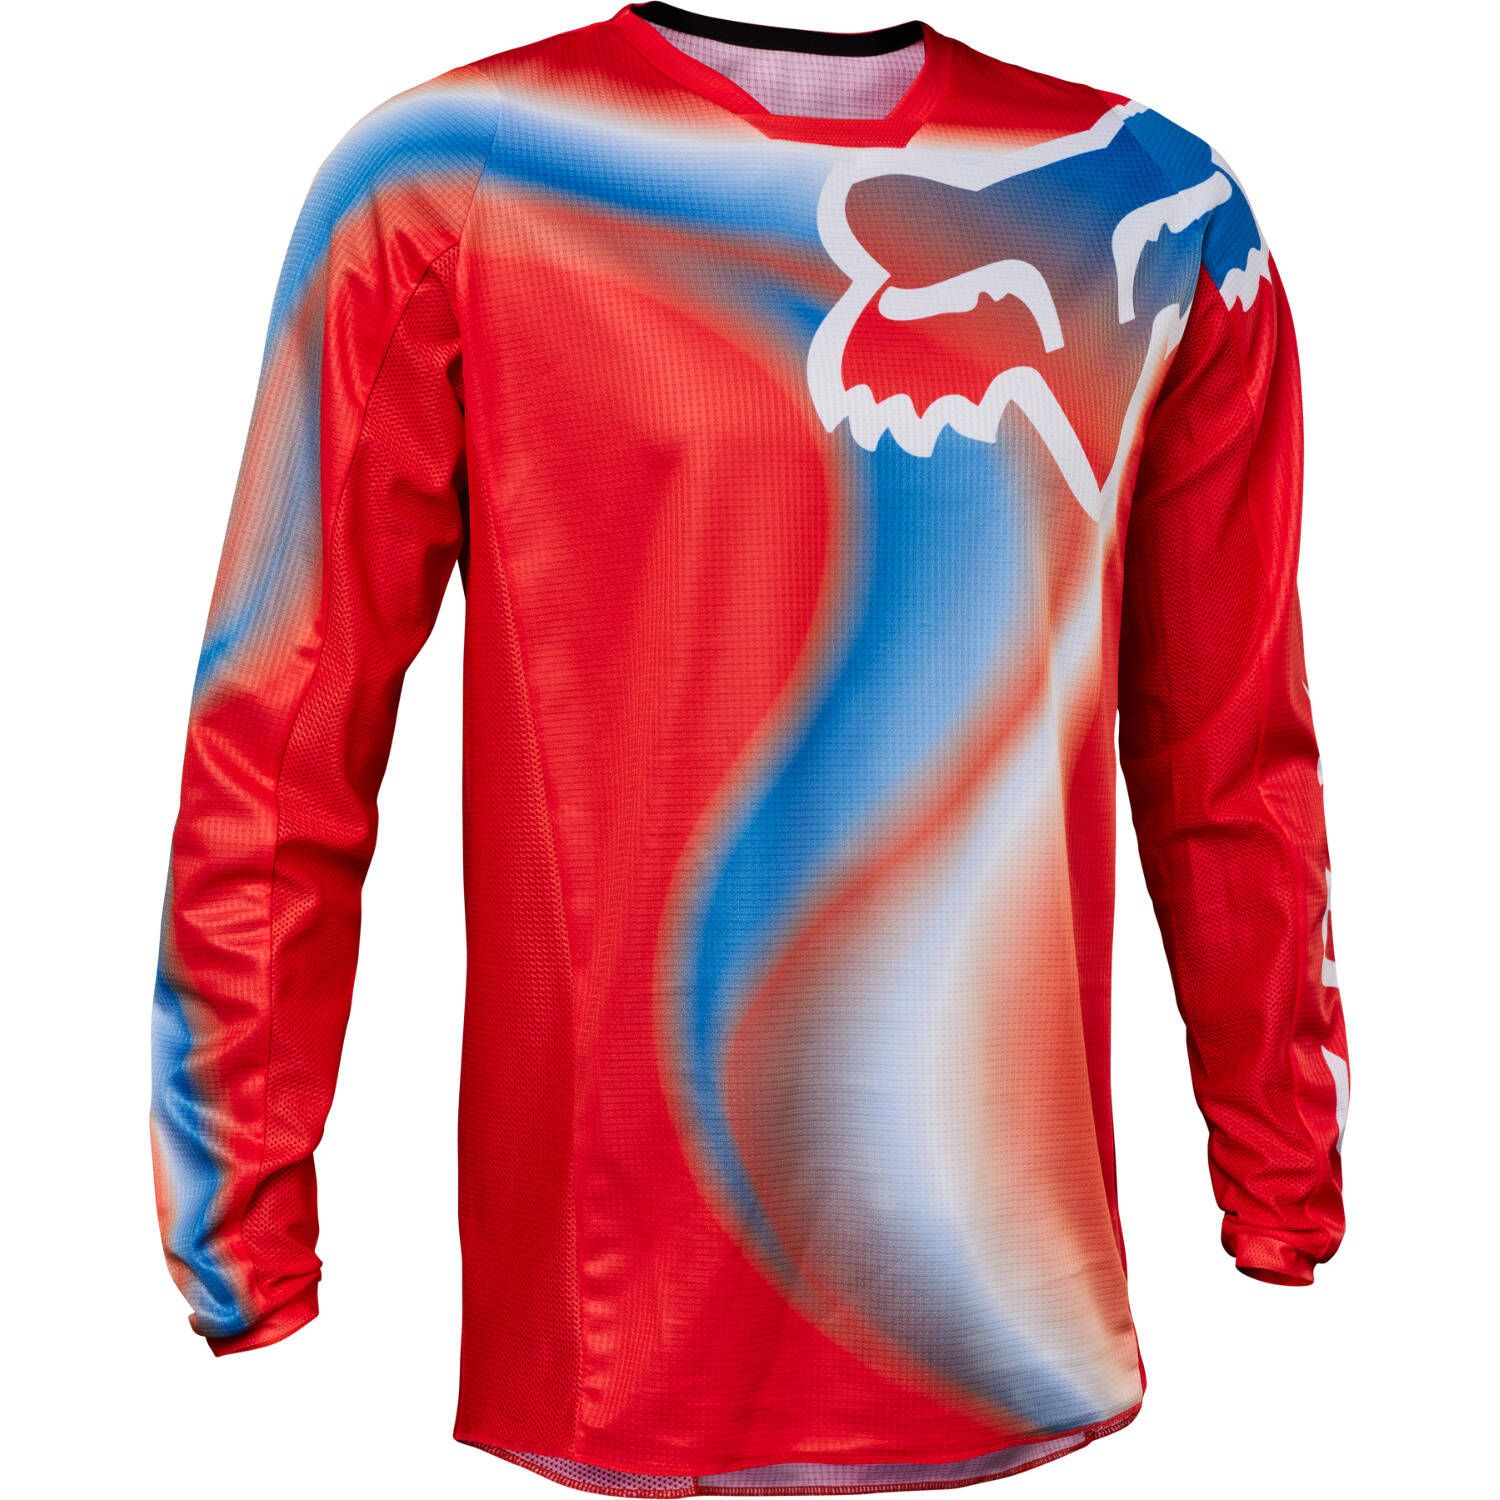 MEN'S 180 TOXYSK JERSEY (FLO RED) | Fox Racing